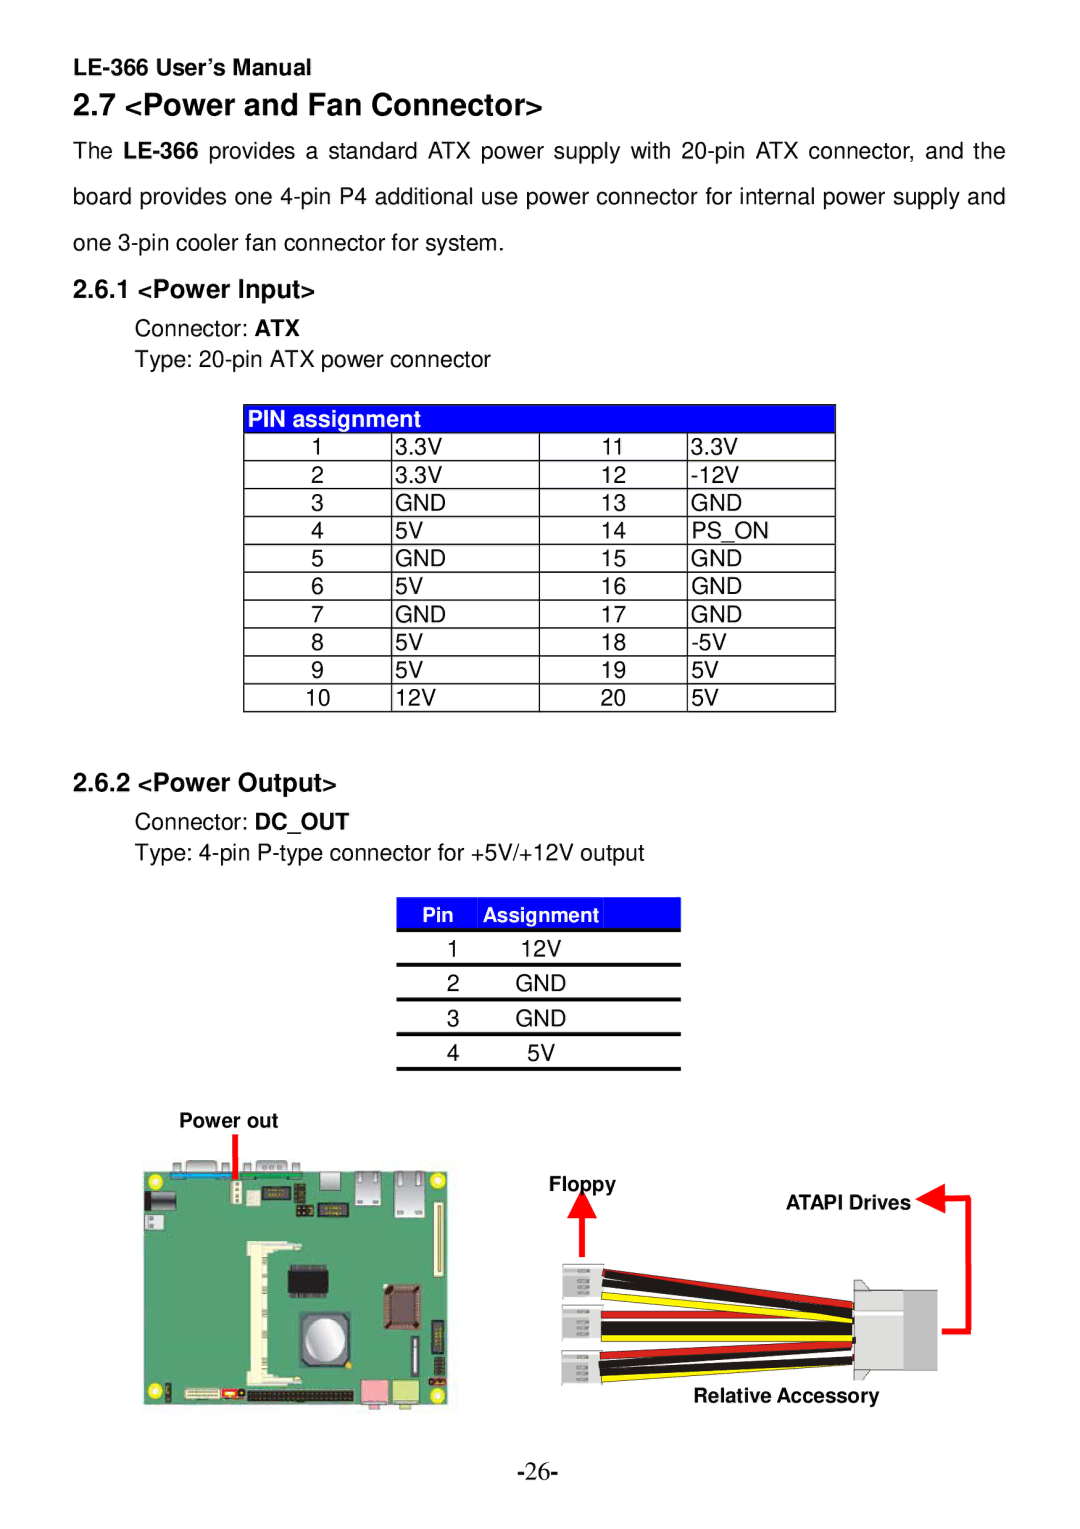 AMD LX800 user manual Power and Fan Connector, Power Input, Power Output 